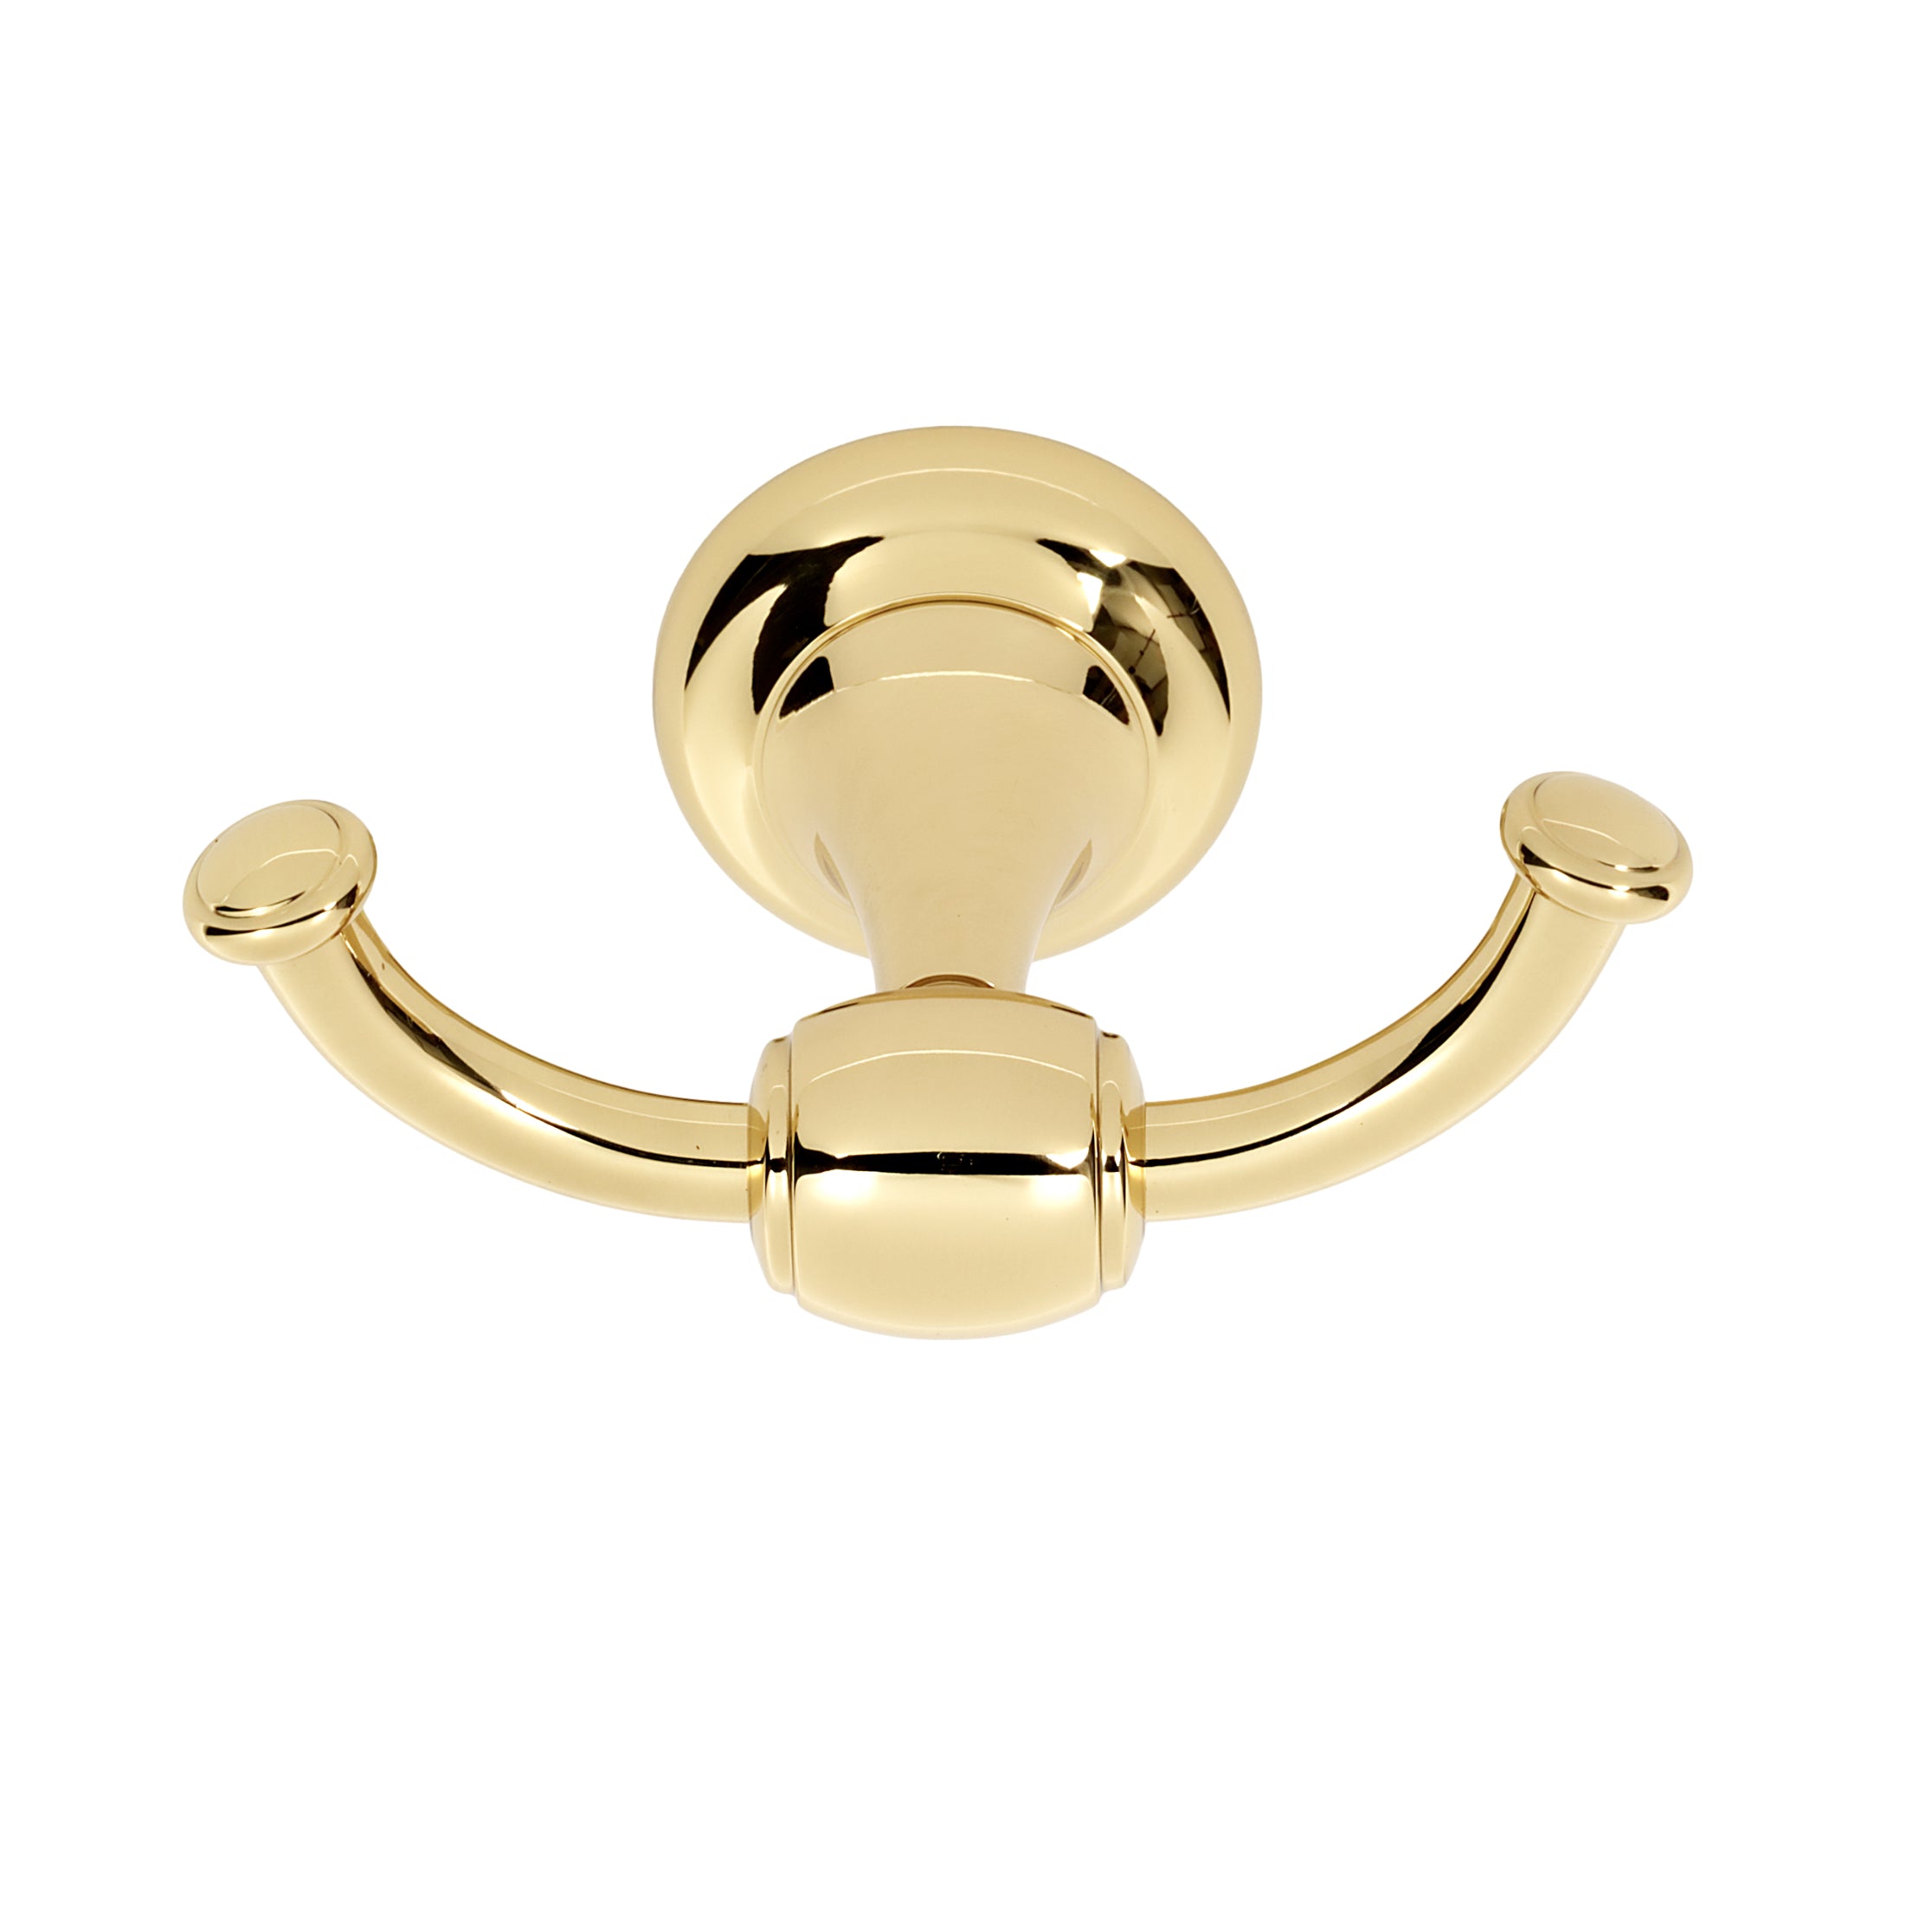 Polished Unlacquered Brass Double Wall Coat Hook